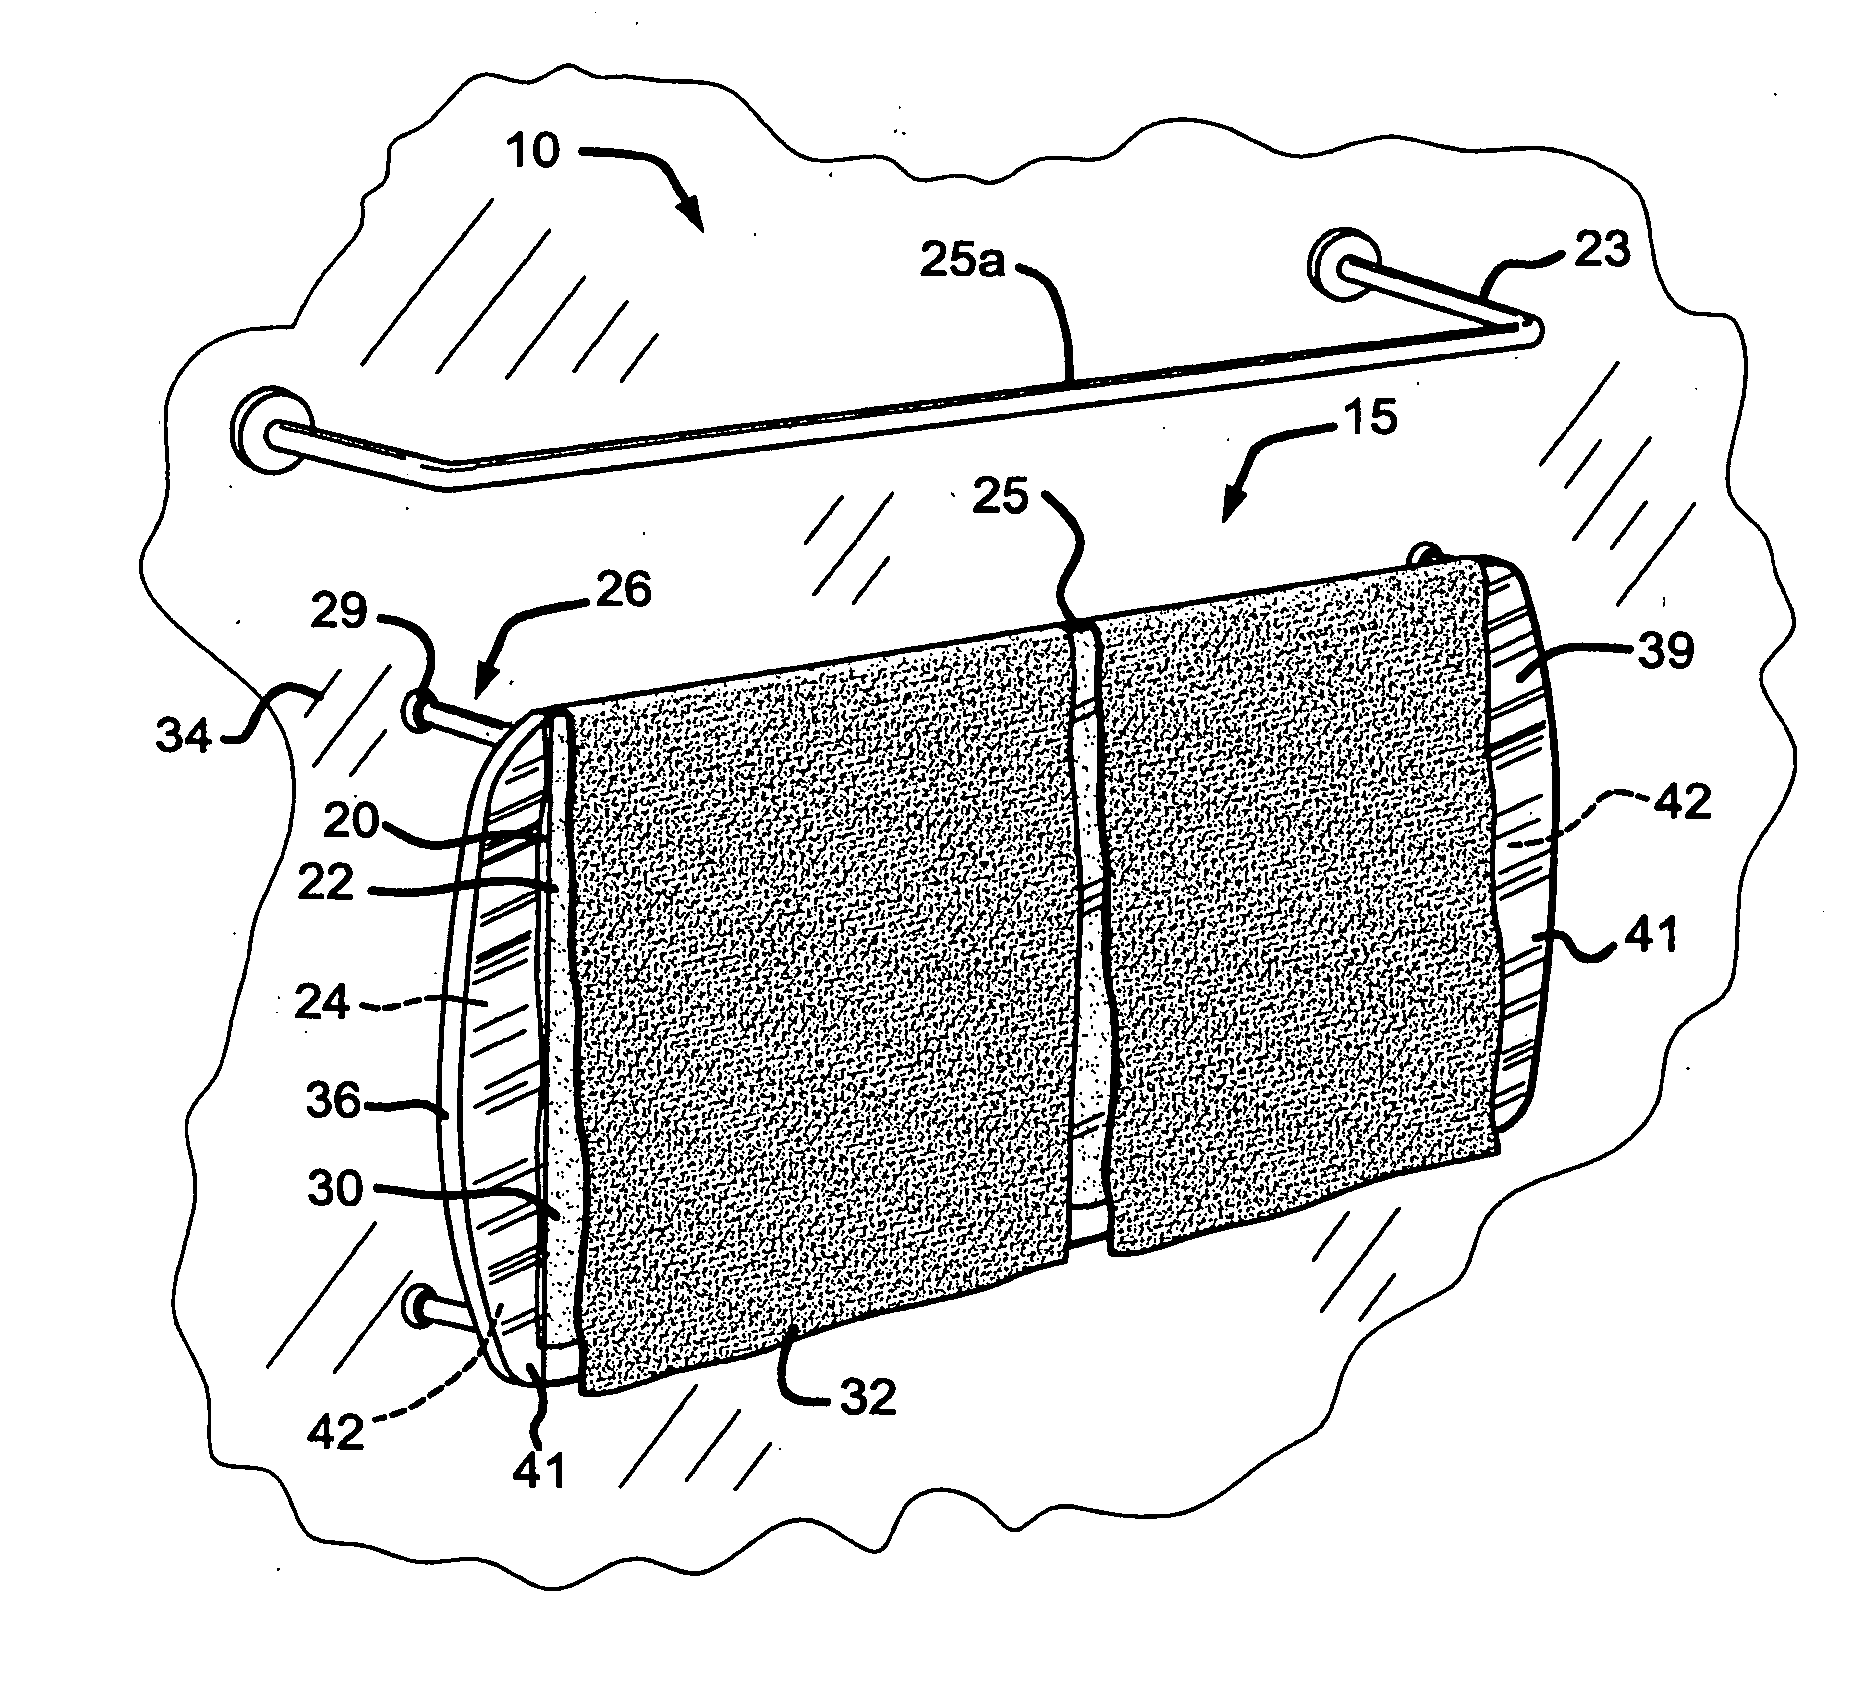 Method and apparatus for a cloth heater